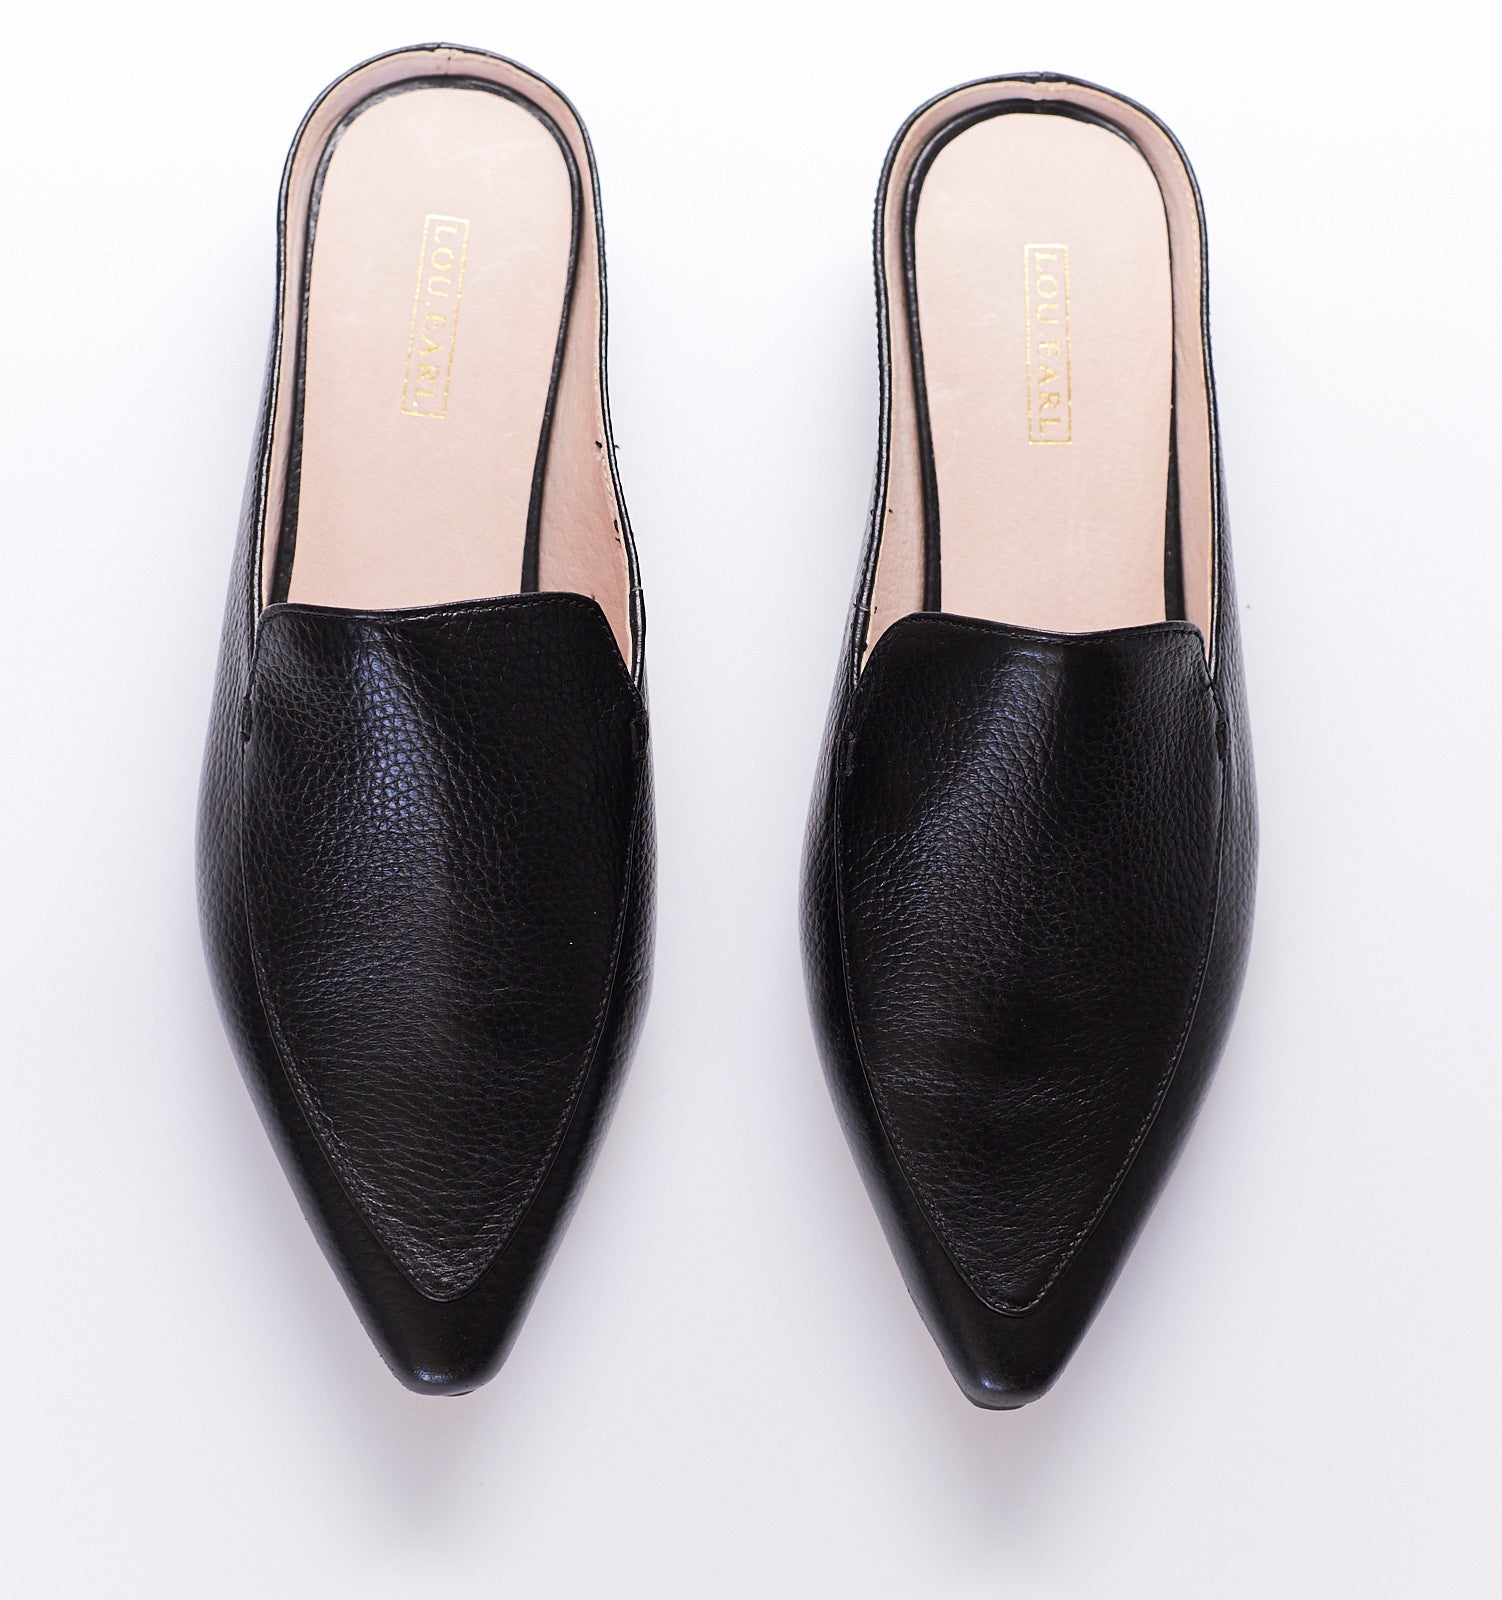 black pointe toe leather flat shoes with an open back for women